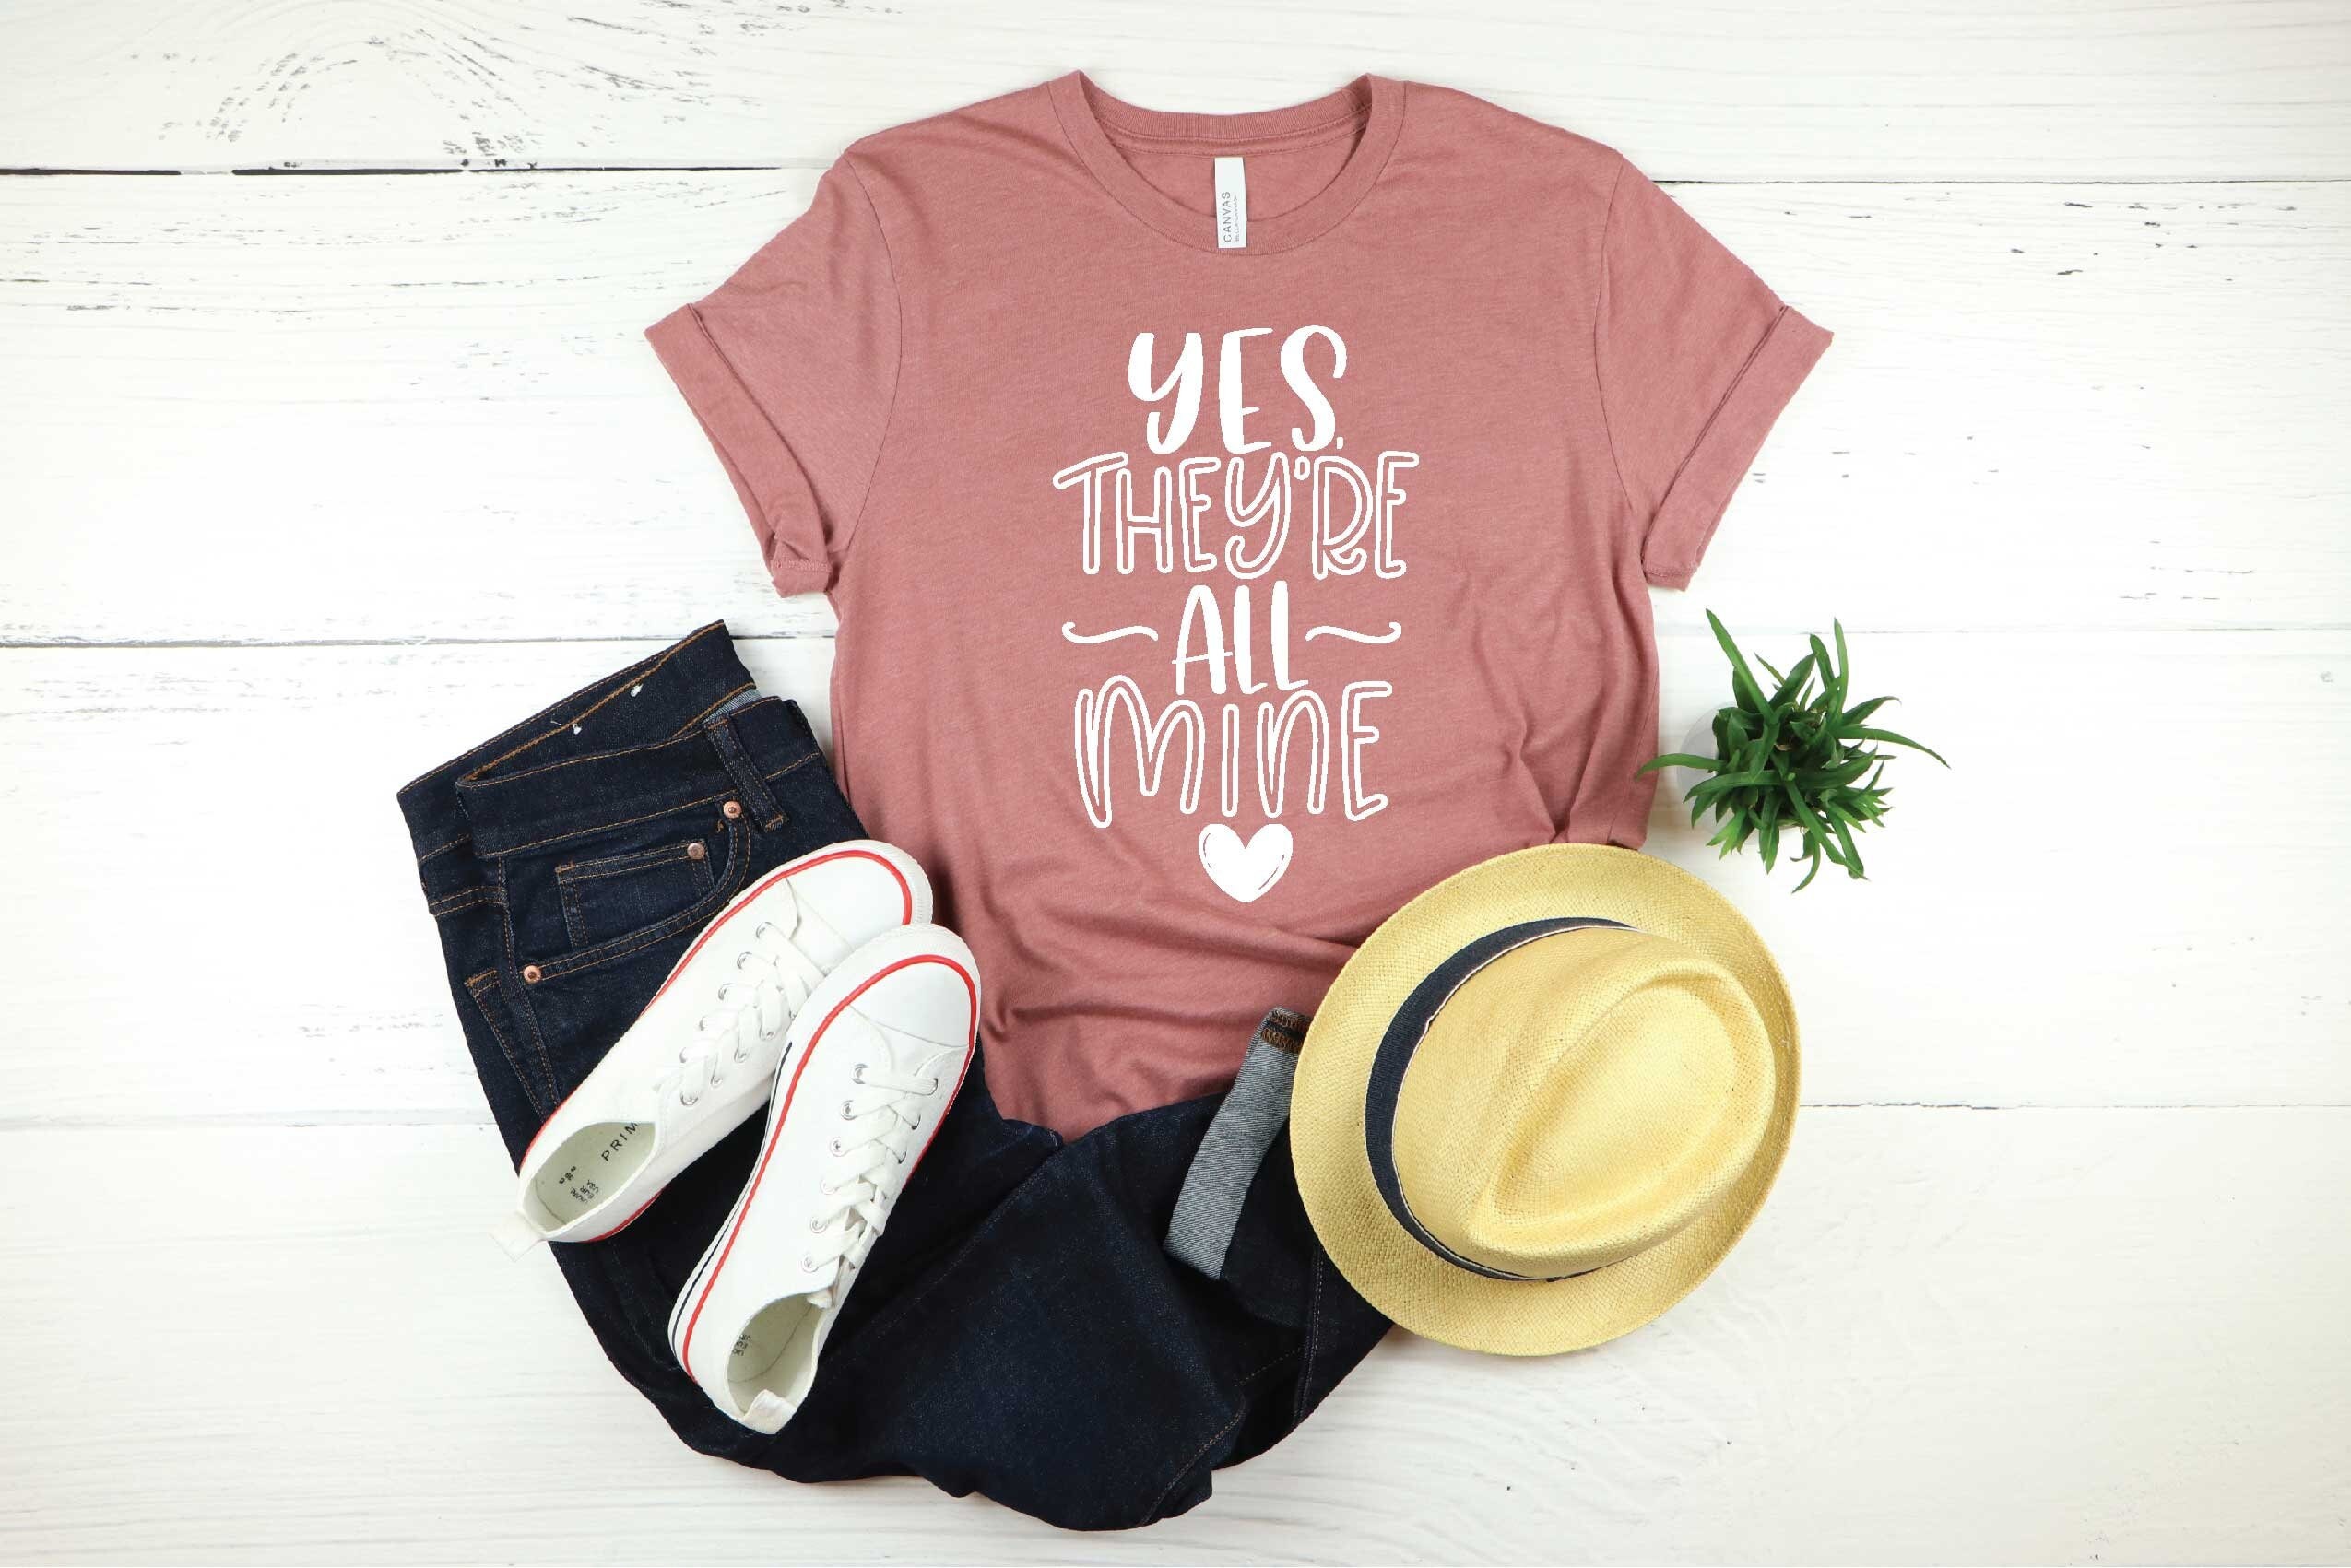 Yes they are all mine,Mom Life Shirt Mom Shirts,Shirts for Moms,Mothers Day,Trendy Mom T-Shirts Cool Mom Shirts Shirts for Moms,mama shirt